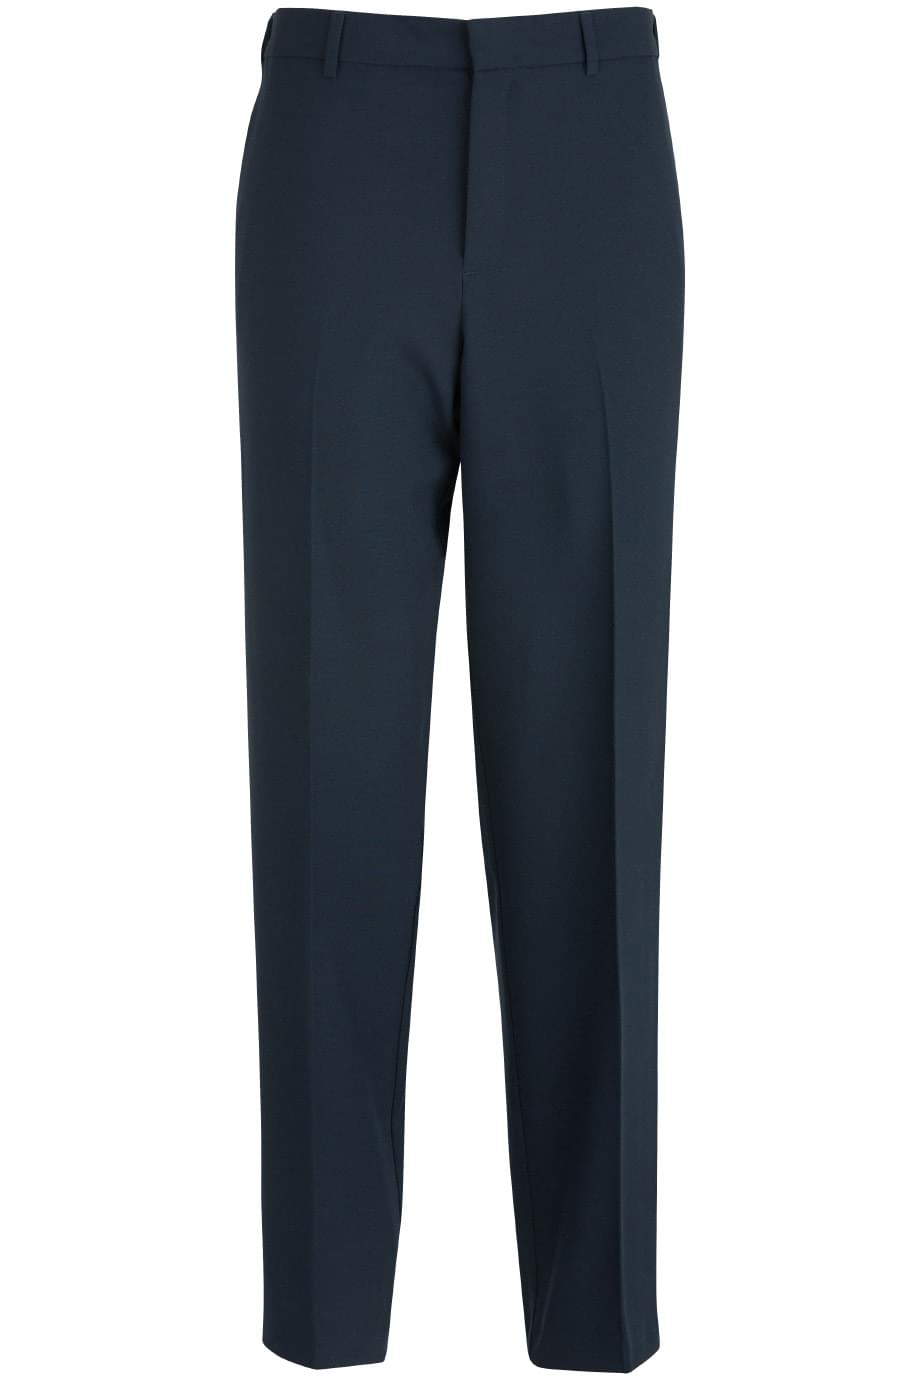 ESSENTIAL FLAT FRONT PANT